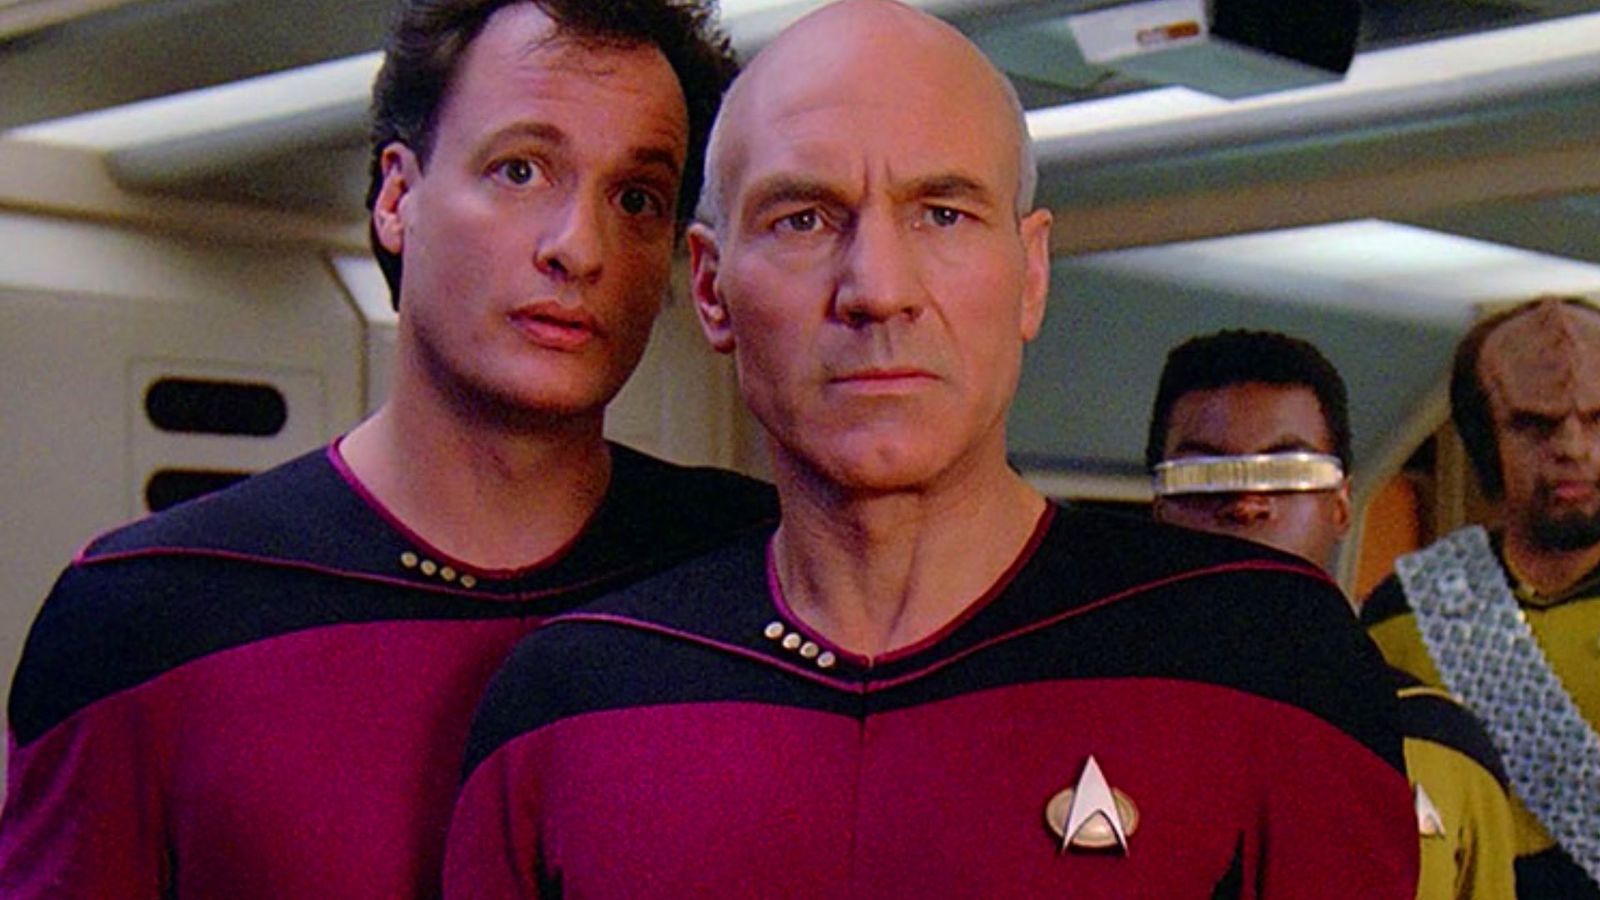 Q and Picard on the Enterprise D bridge with a communicator badge on their chest